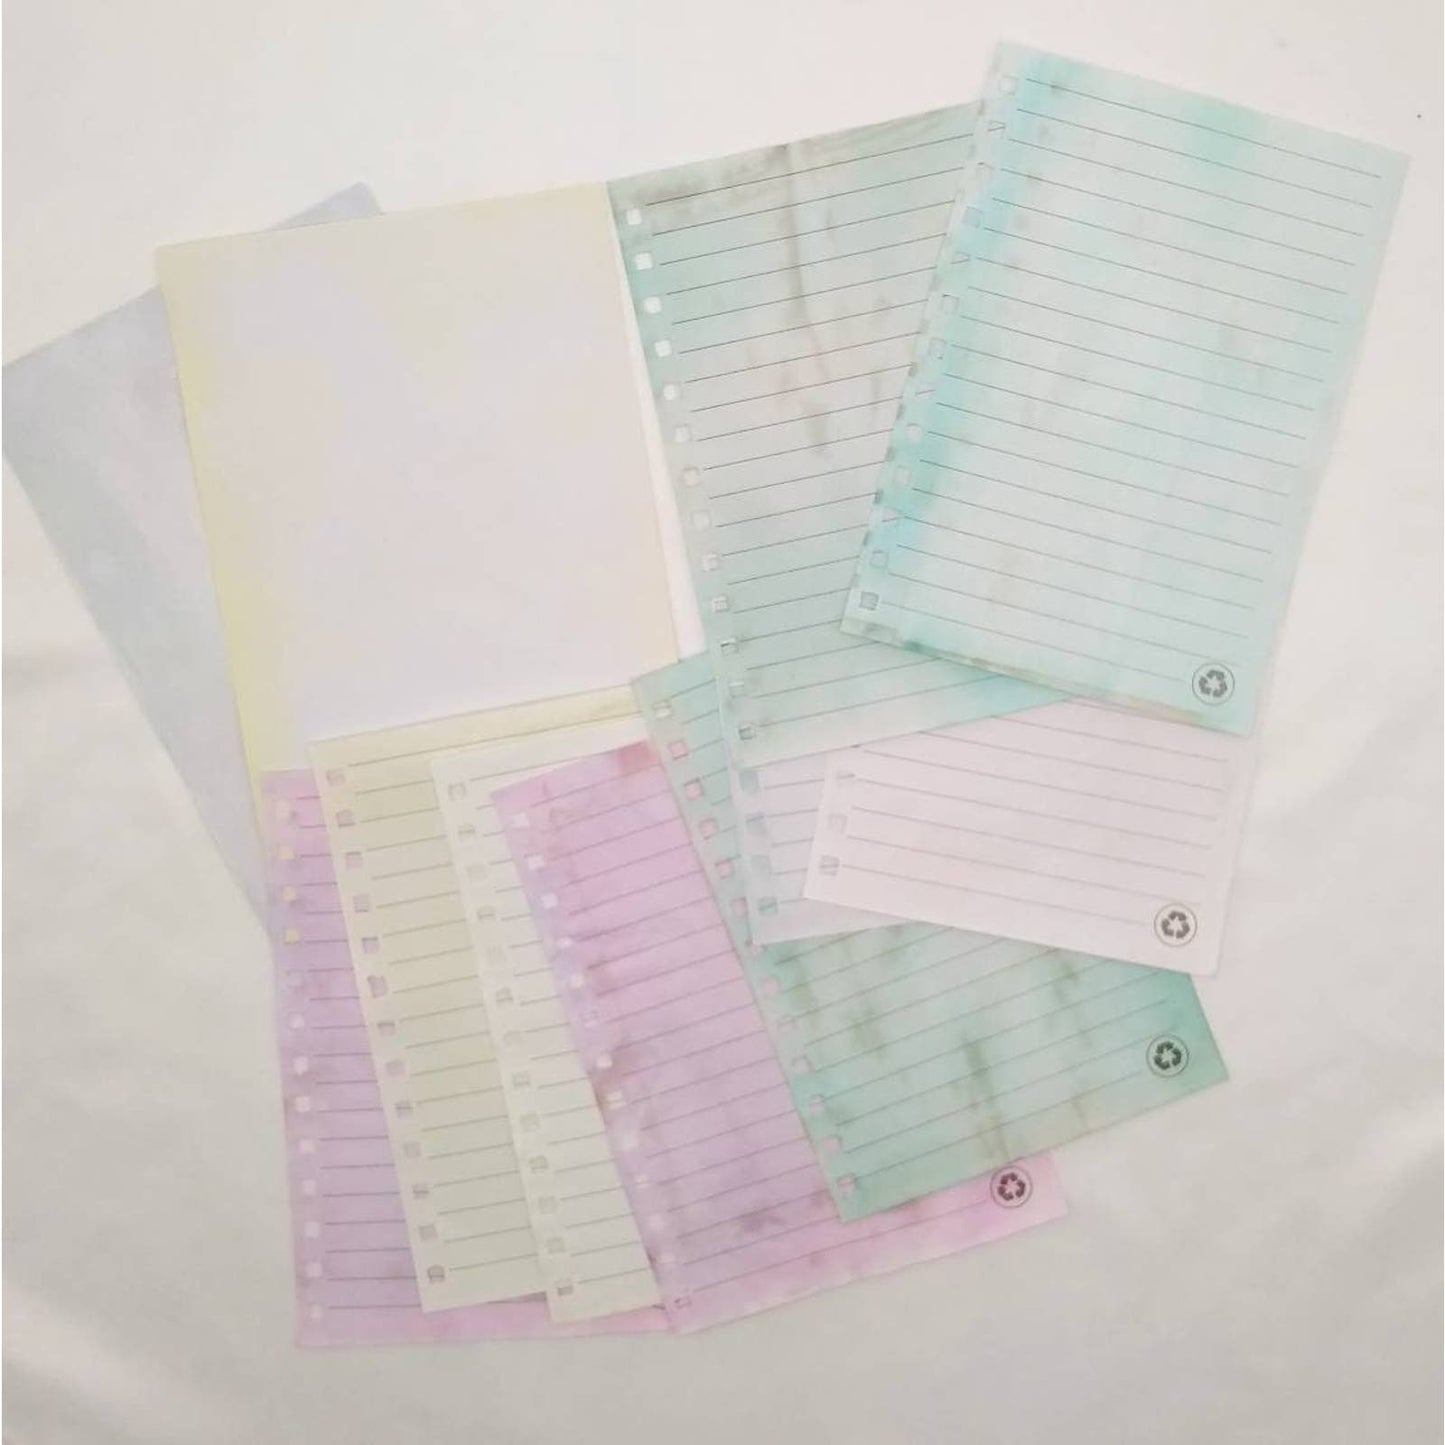 Dyed Papers Variety Pack, Pastel Dyed Paper, Hand Dyed Papers, Junk Journal Supply